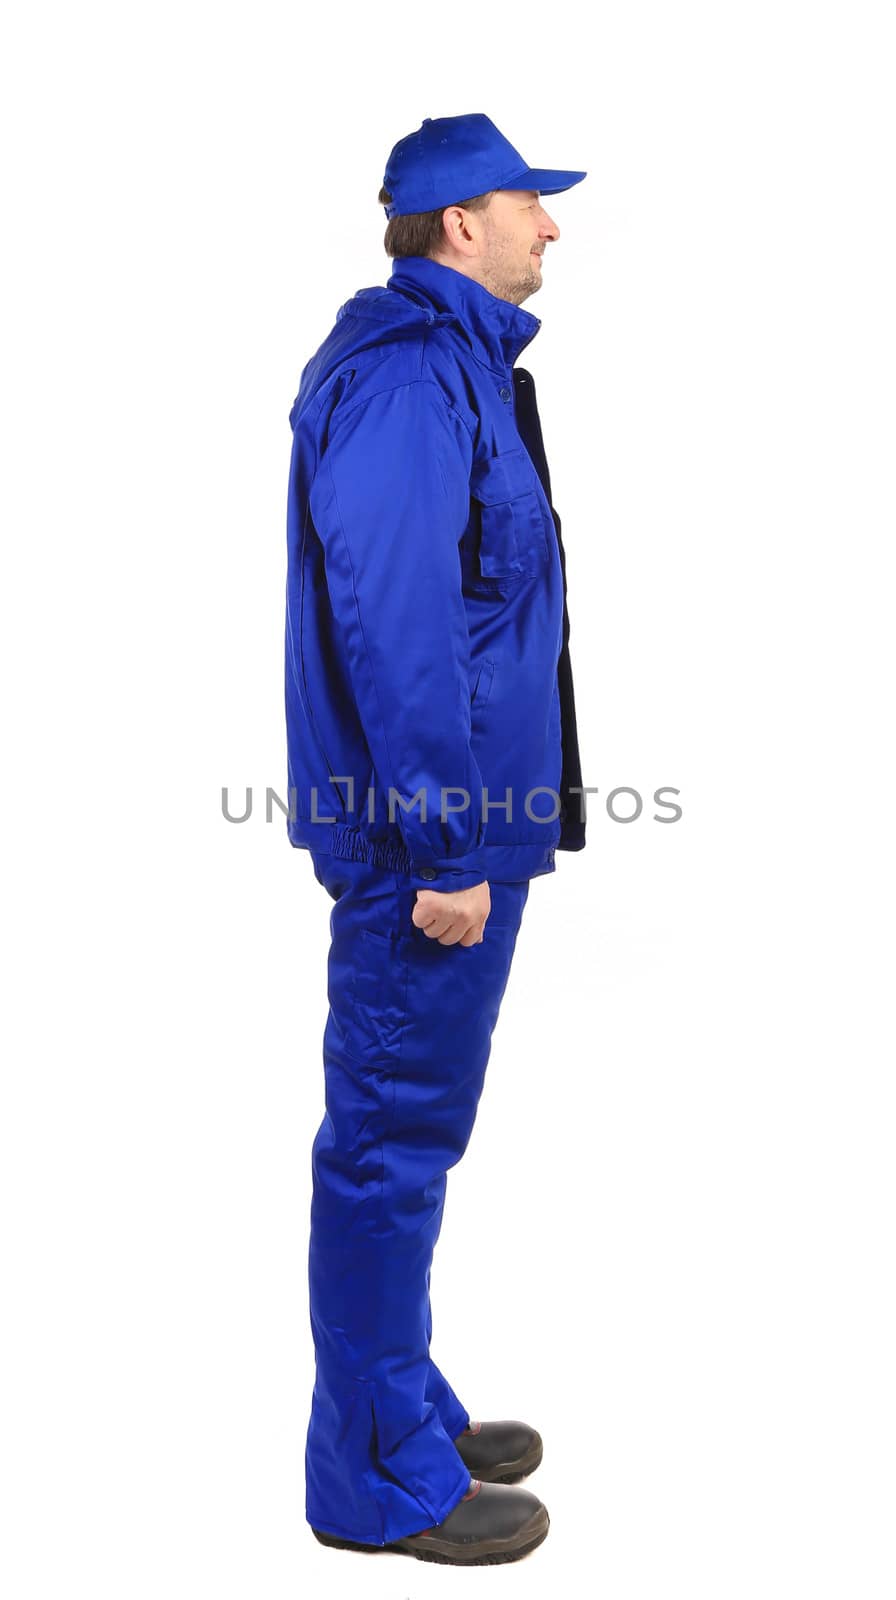 Worker in blue uniform. Isolated on a white background.